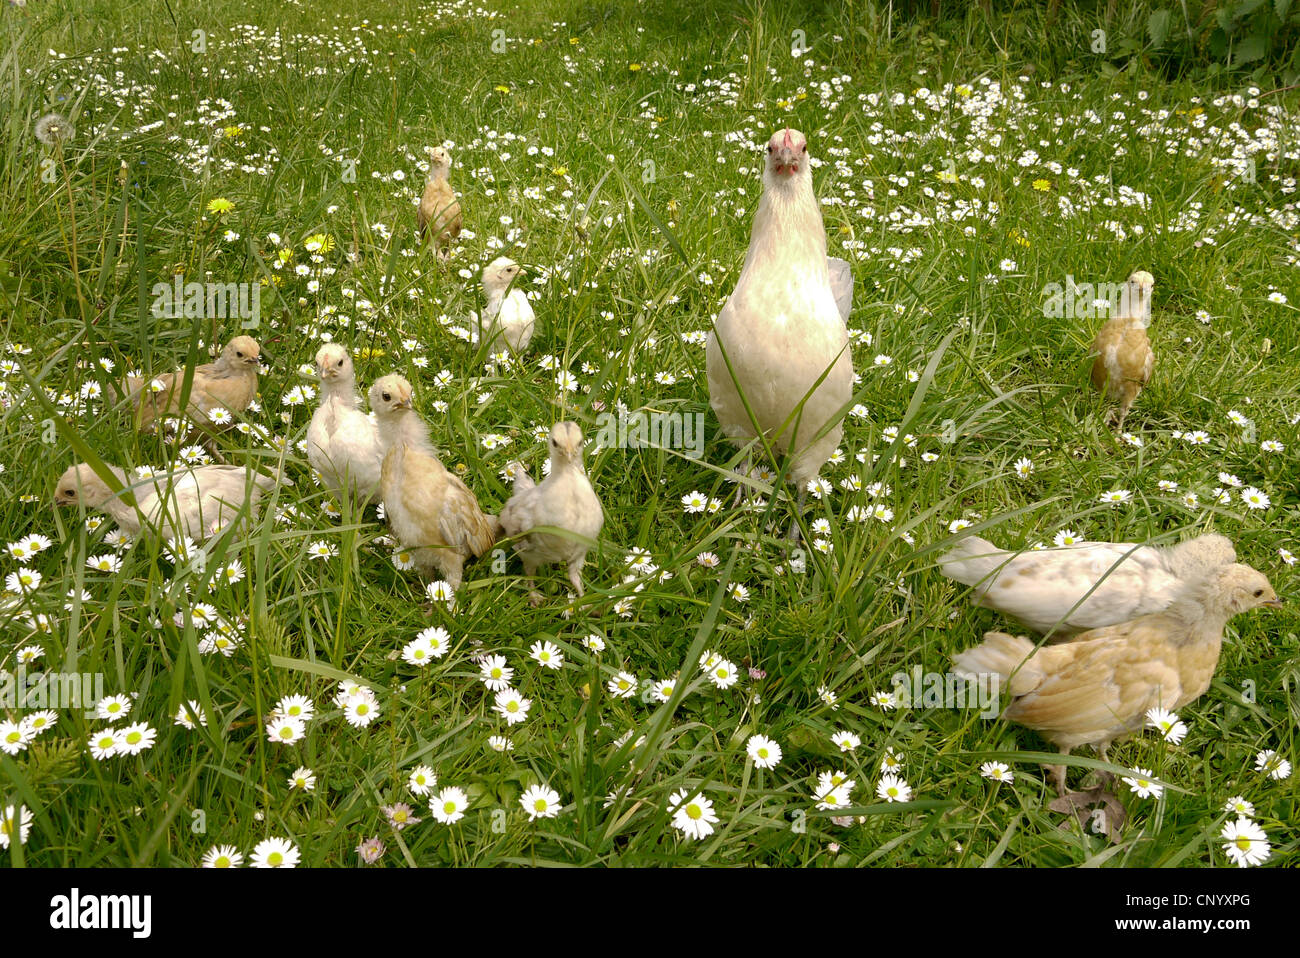 bantam (Gallus gallus f. domestica), hen with chicks in a meadow, Germany Stock Photo